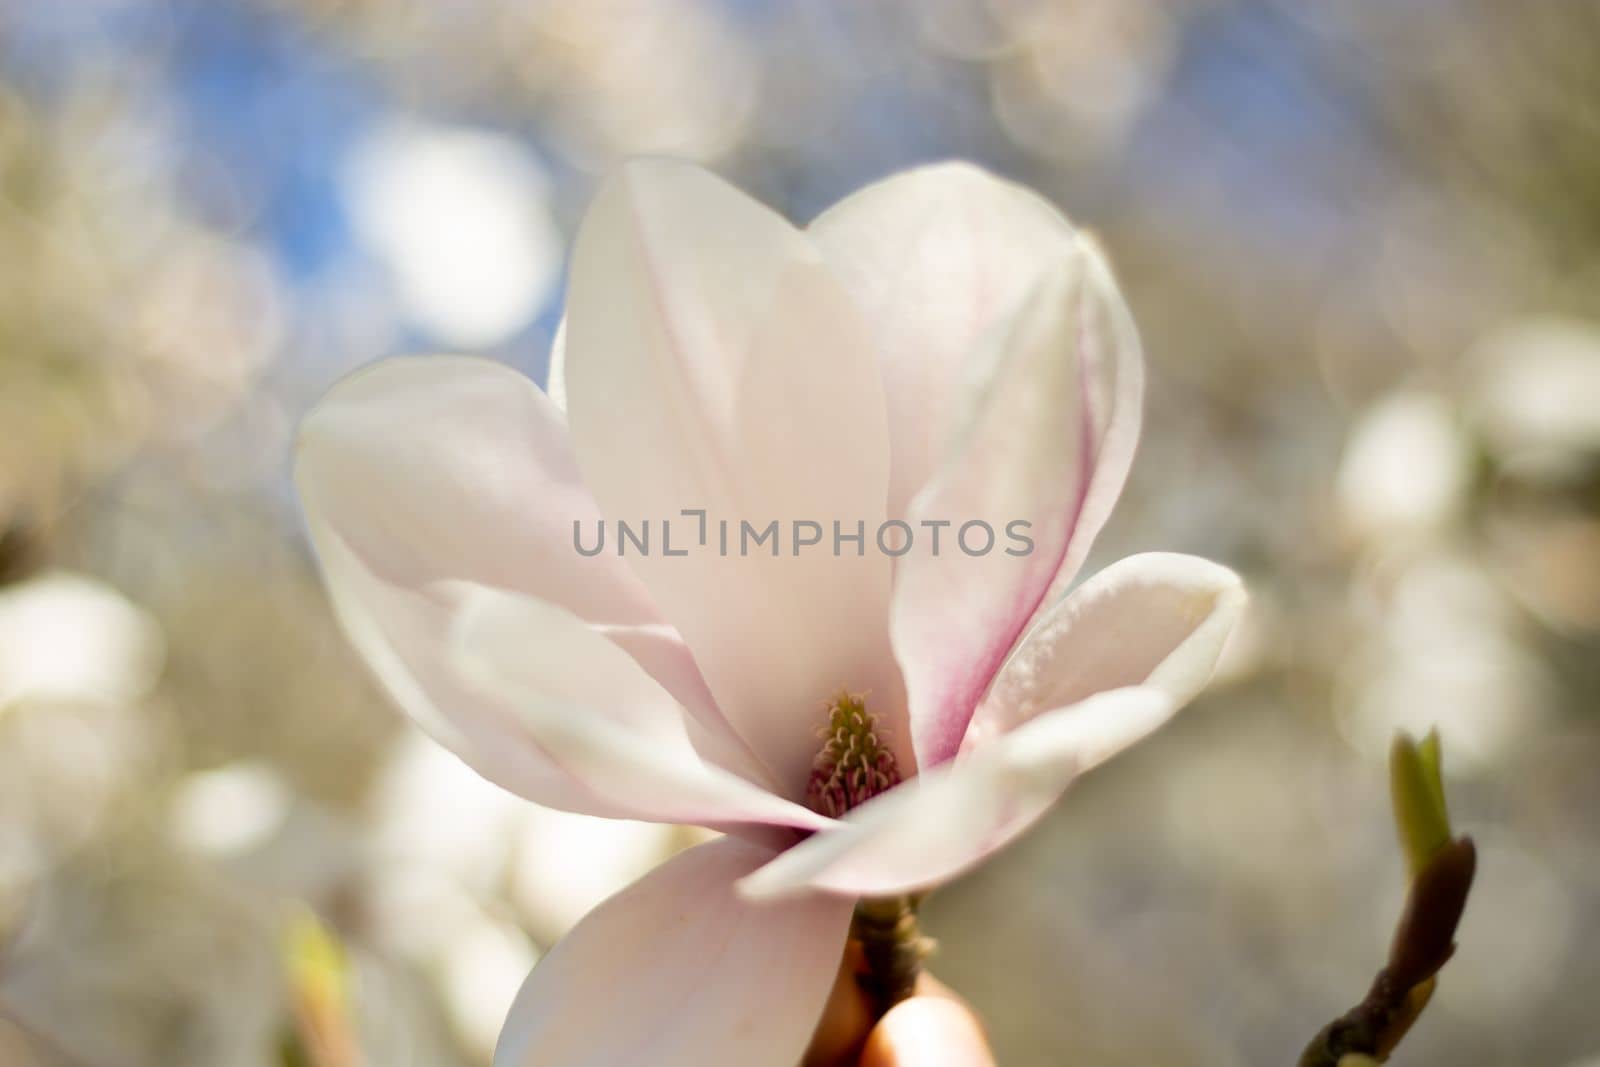 Magnolia flowers in pink blossom nearby, beautiful natural background by scasal15